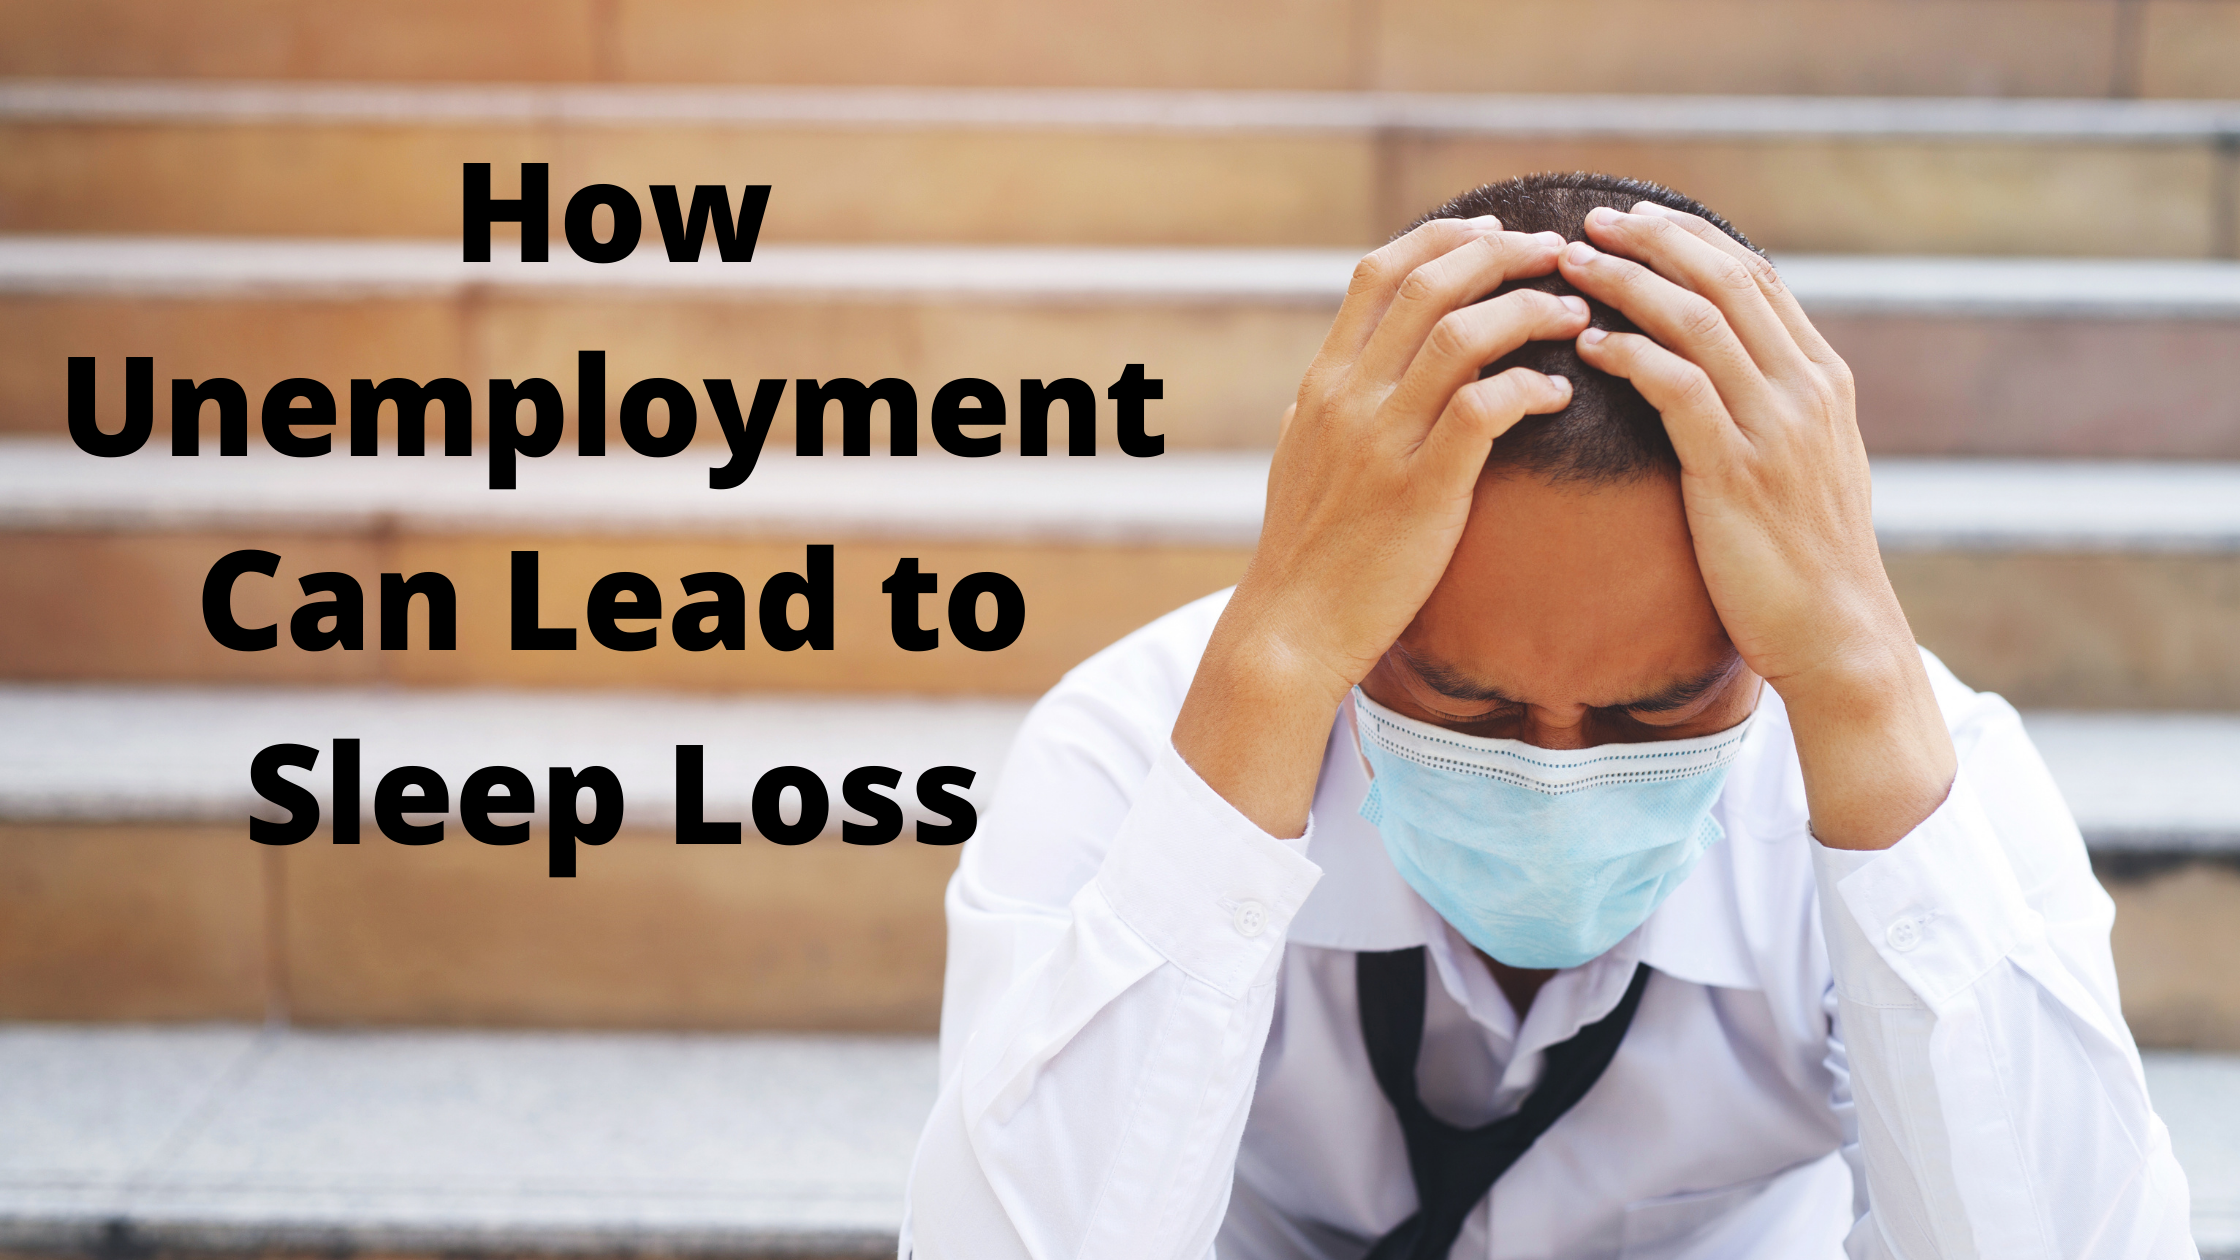 How Unemployment Can Lead to Sleep Loss